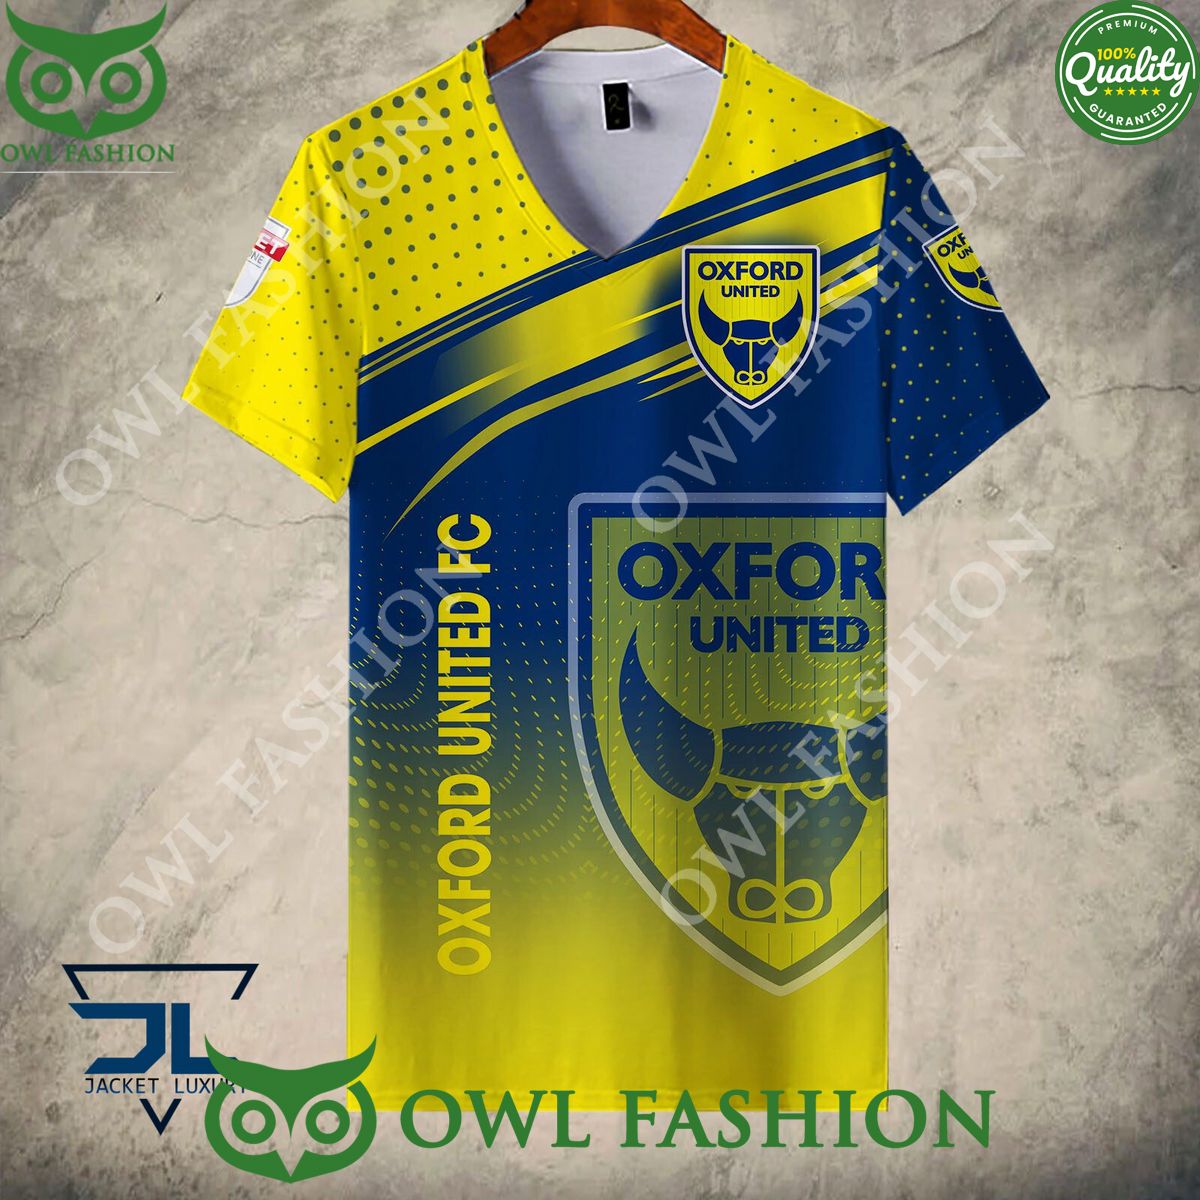 Oxford United F.C EFL Championship Shirt Hoodie This design is a work of art.